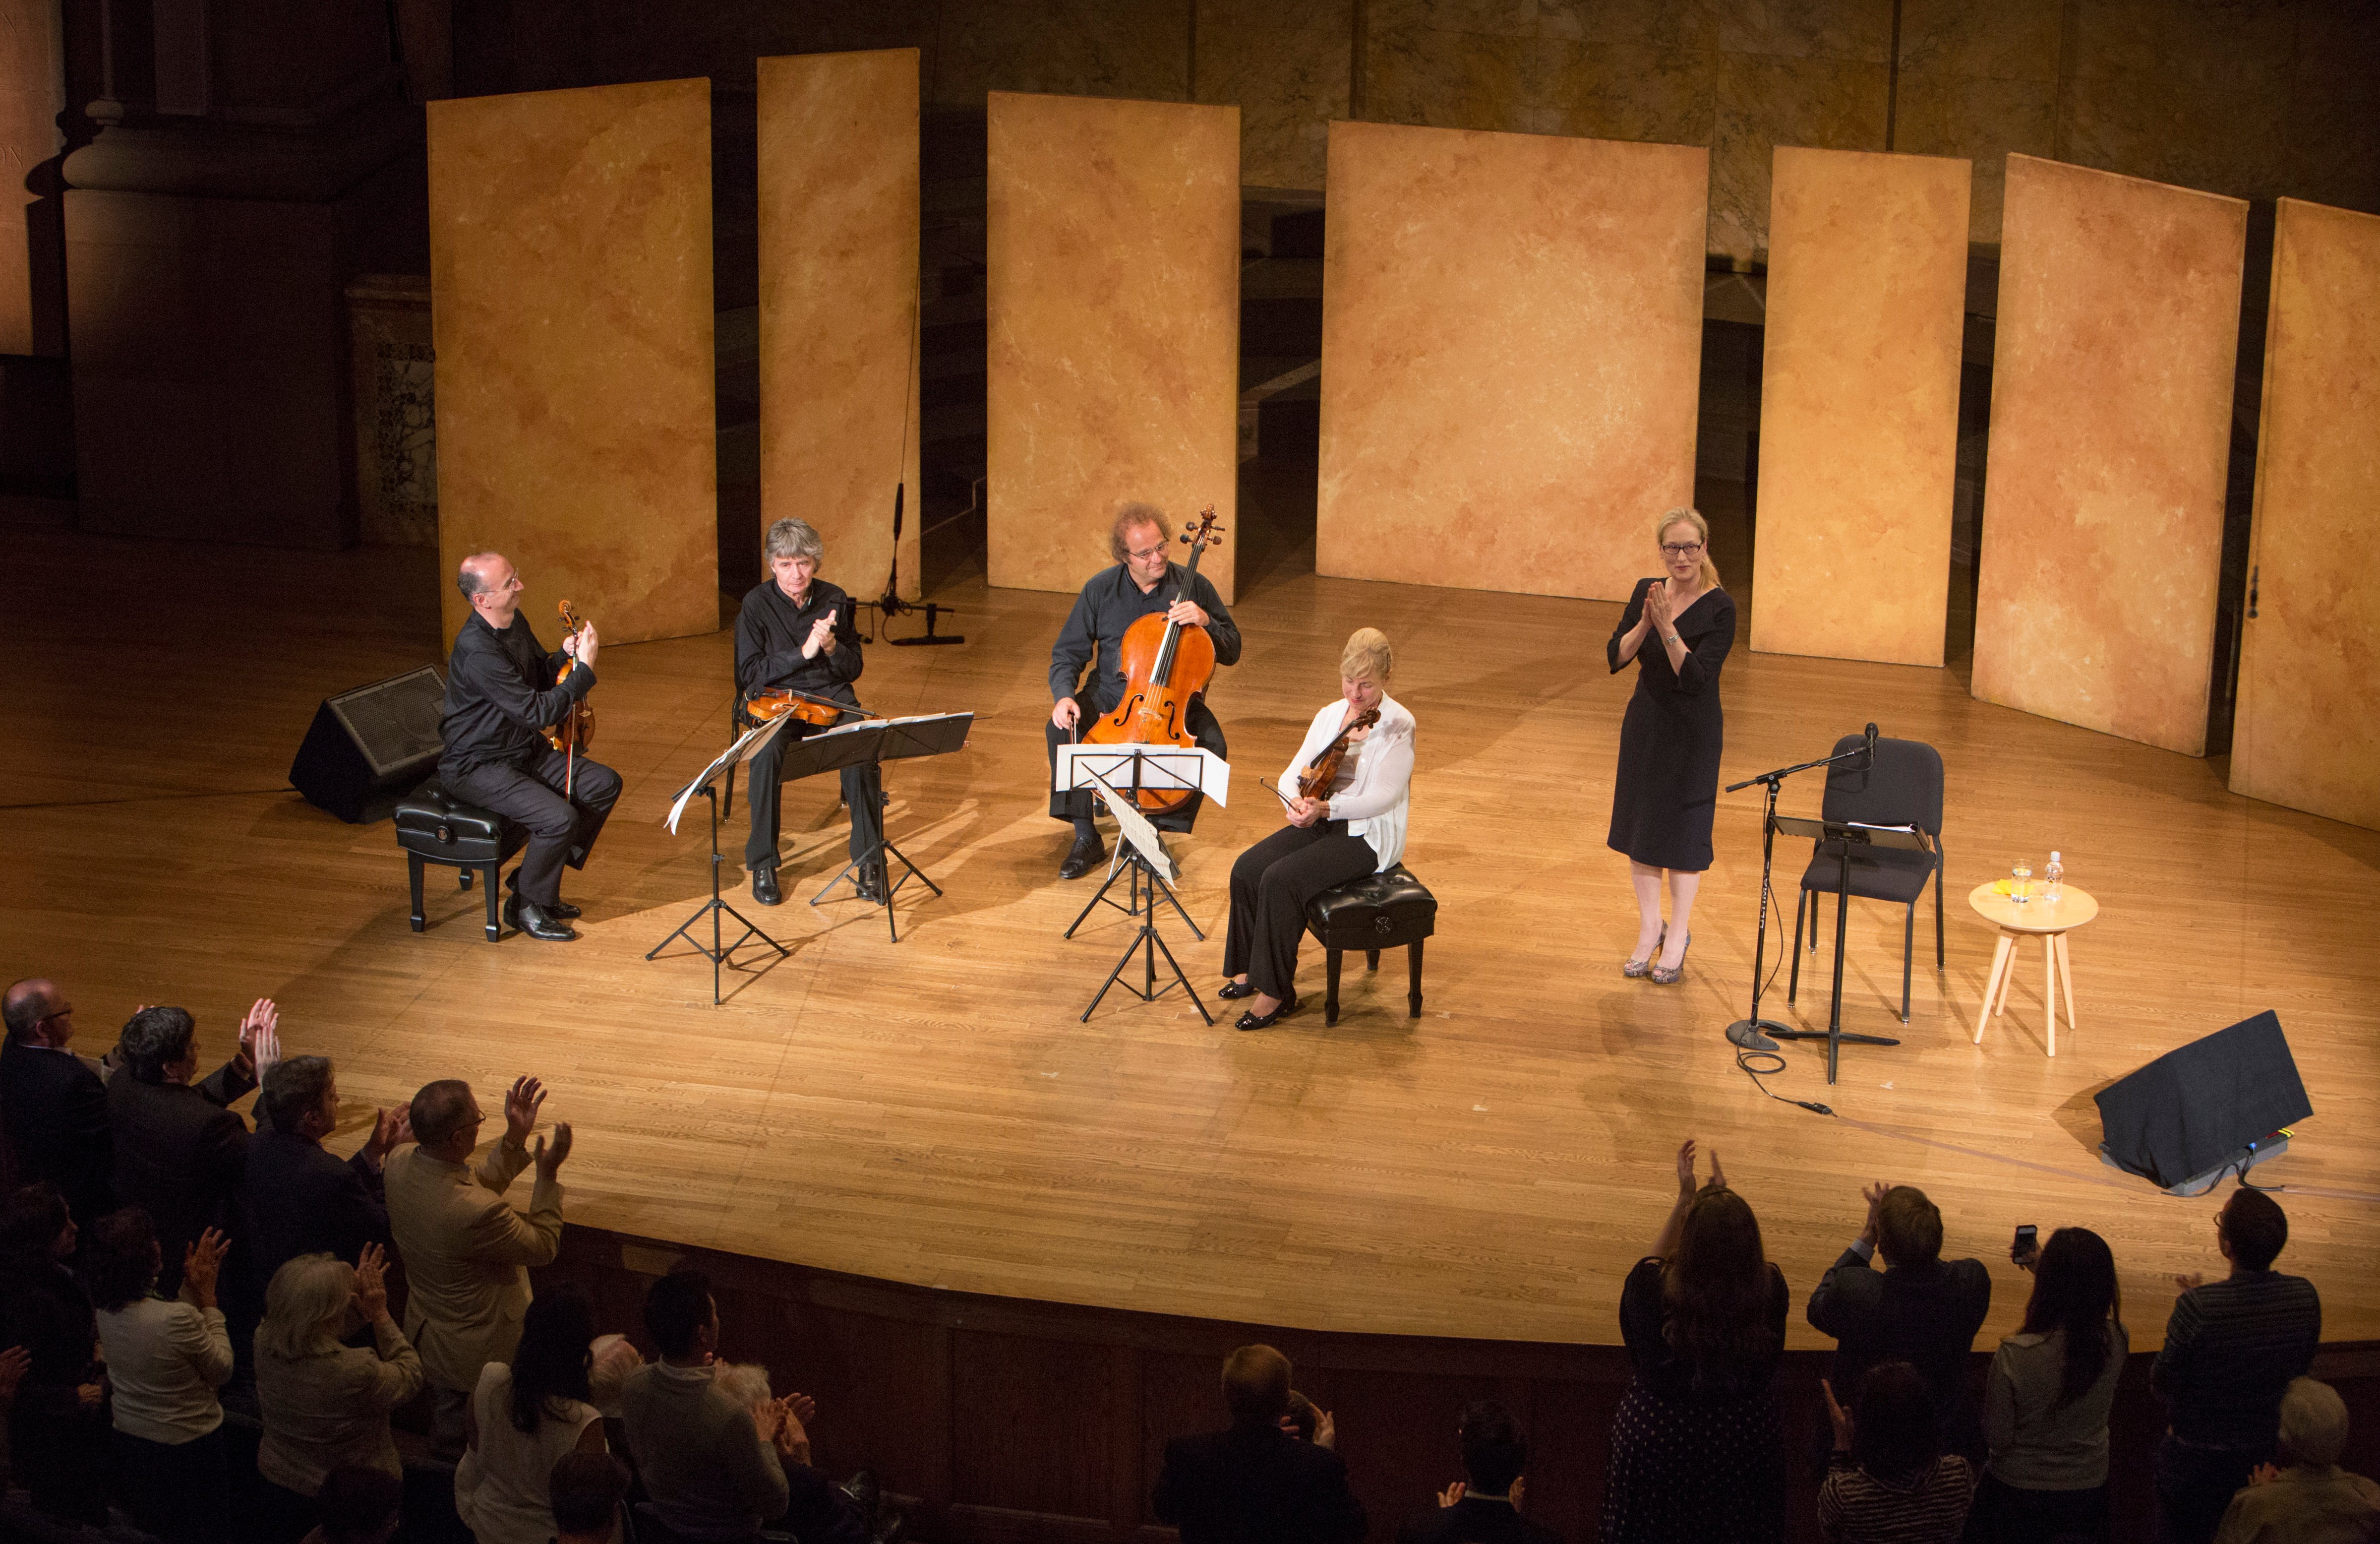 Meryl Streep and the Takacs String Quartet applaud Philip Roth, in the audience at an event presented by Princeton University Concerts. (Denise Applewhite—Princeton University Office of Communications)